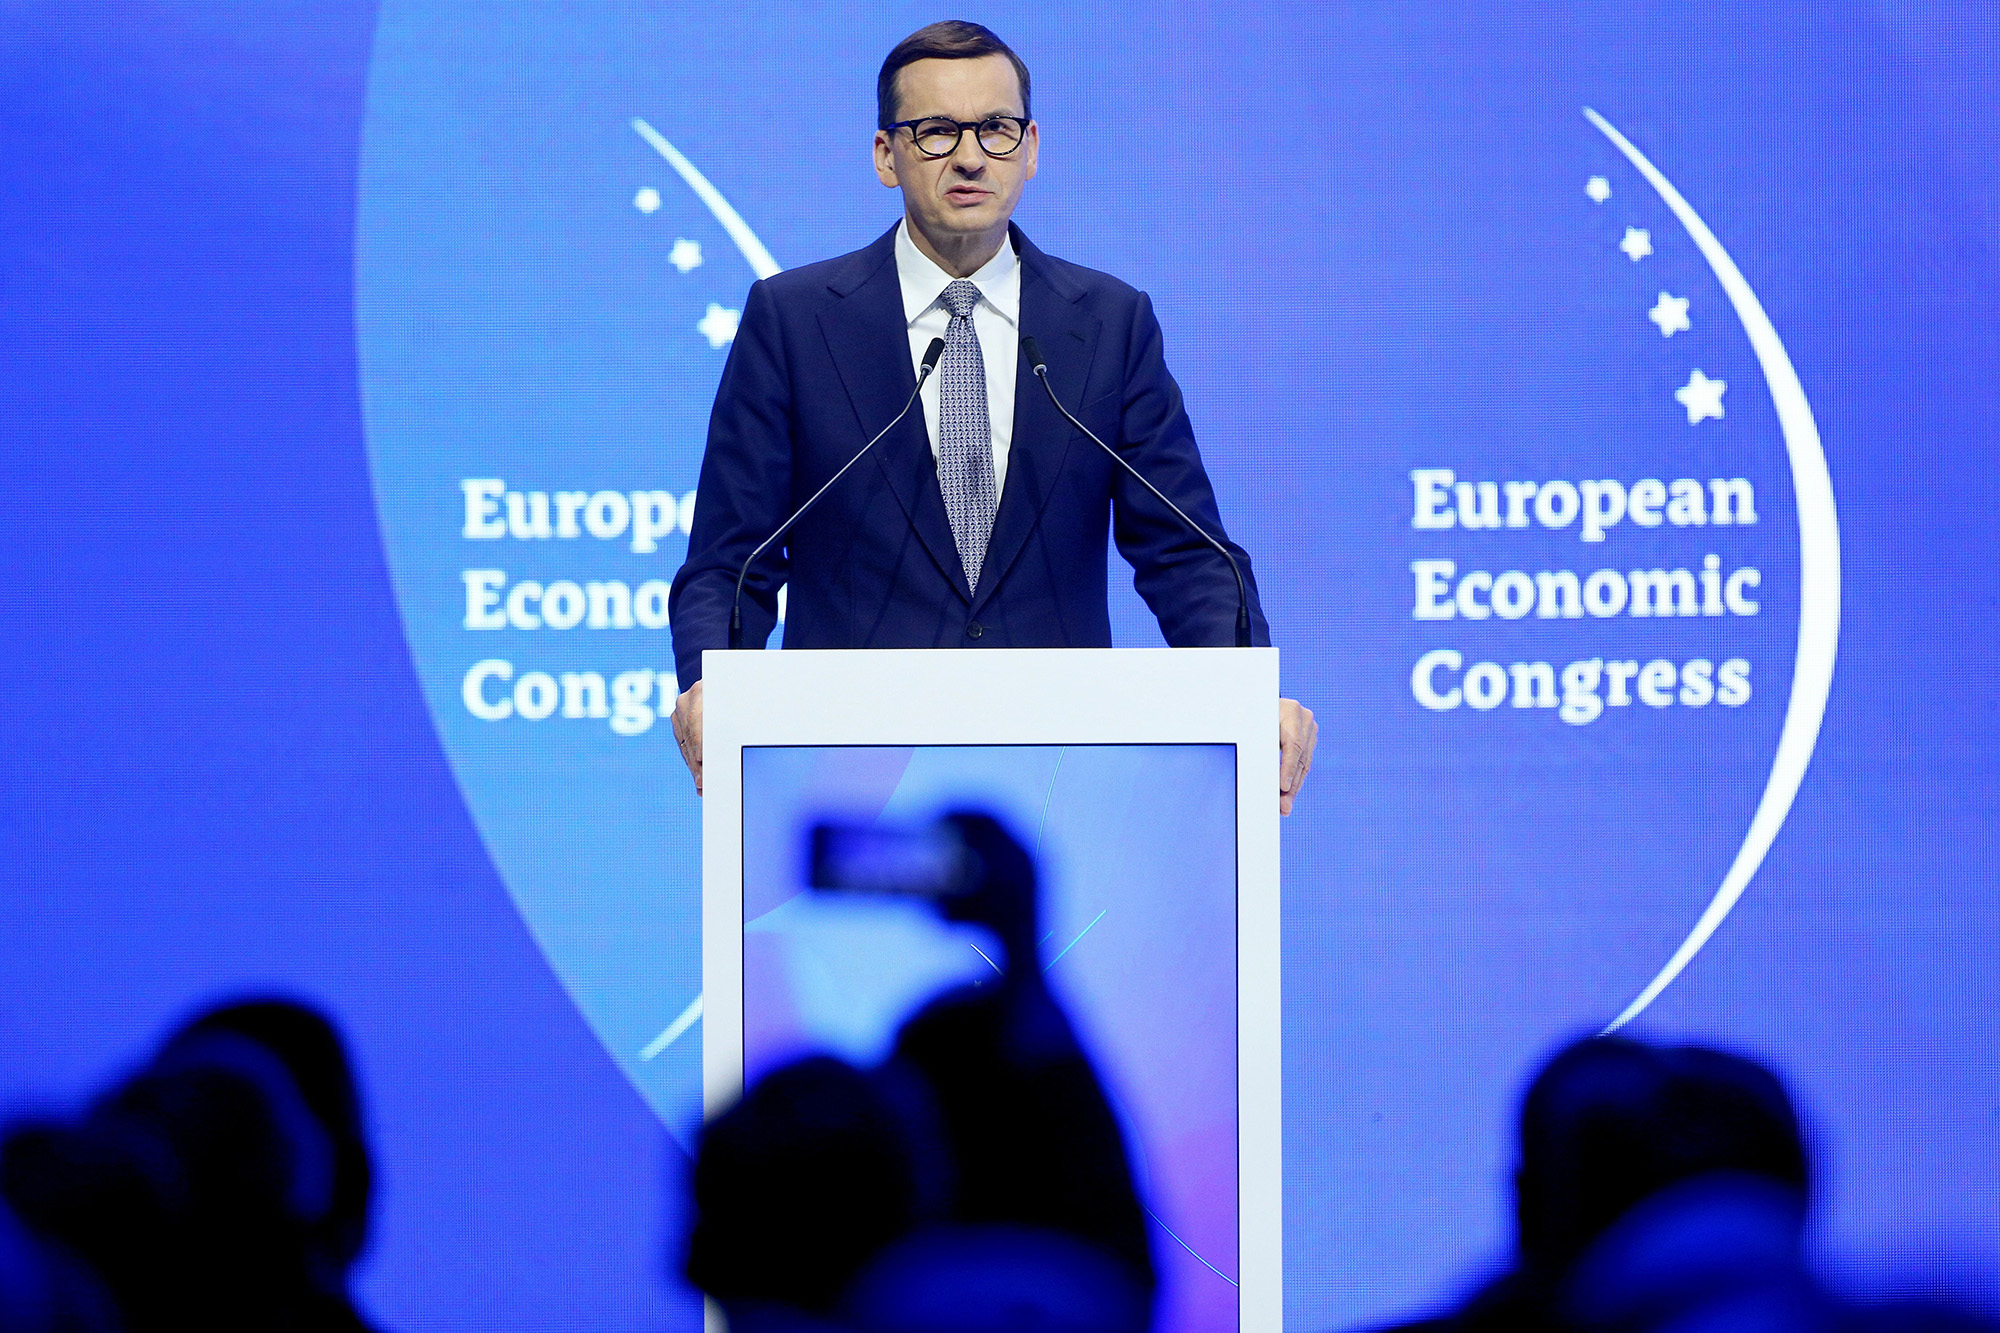 Polish Prime Minister Mateusz Morawiecki speaks during the inauguration of the XIV European Economic Congress at the International Congress Center in Katowice, Poland, on April 25.